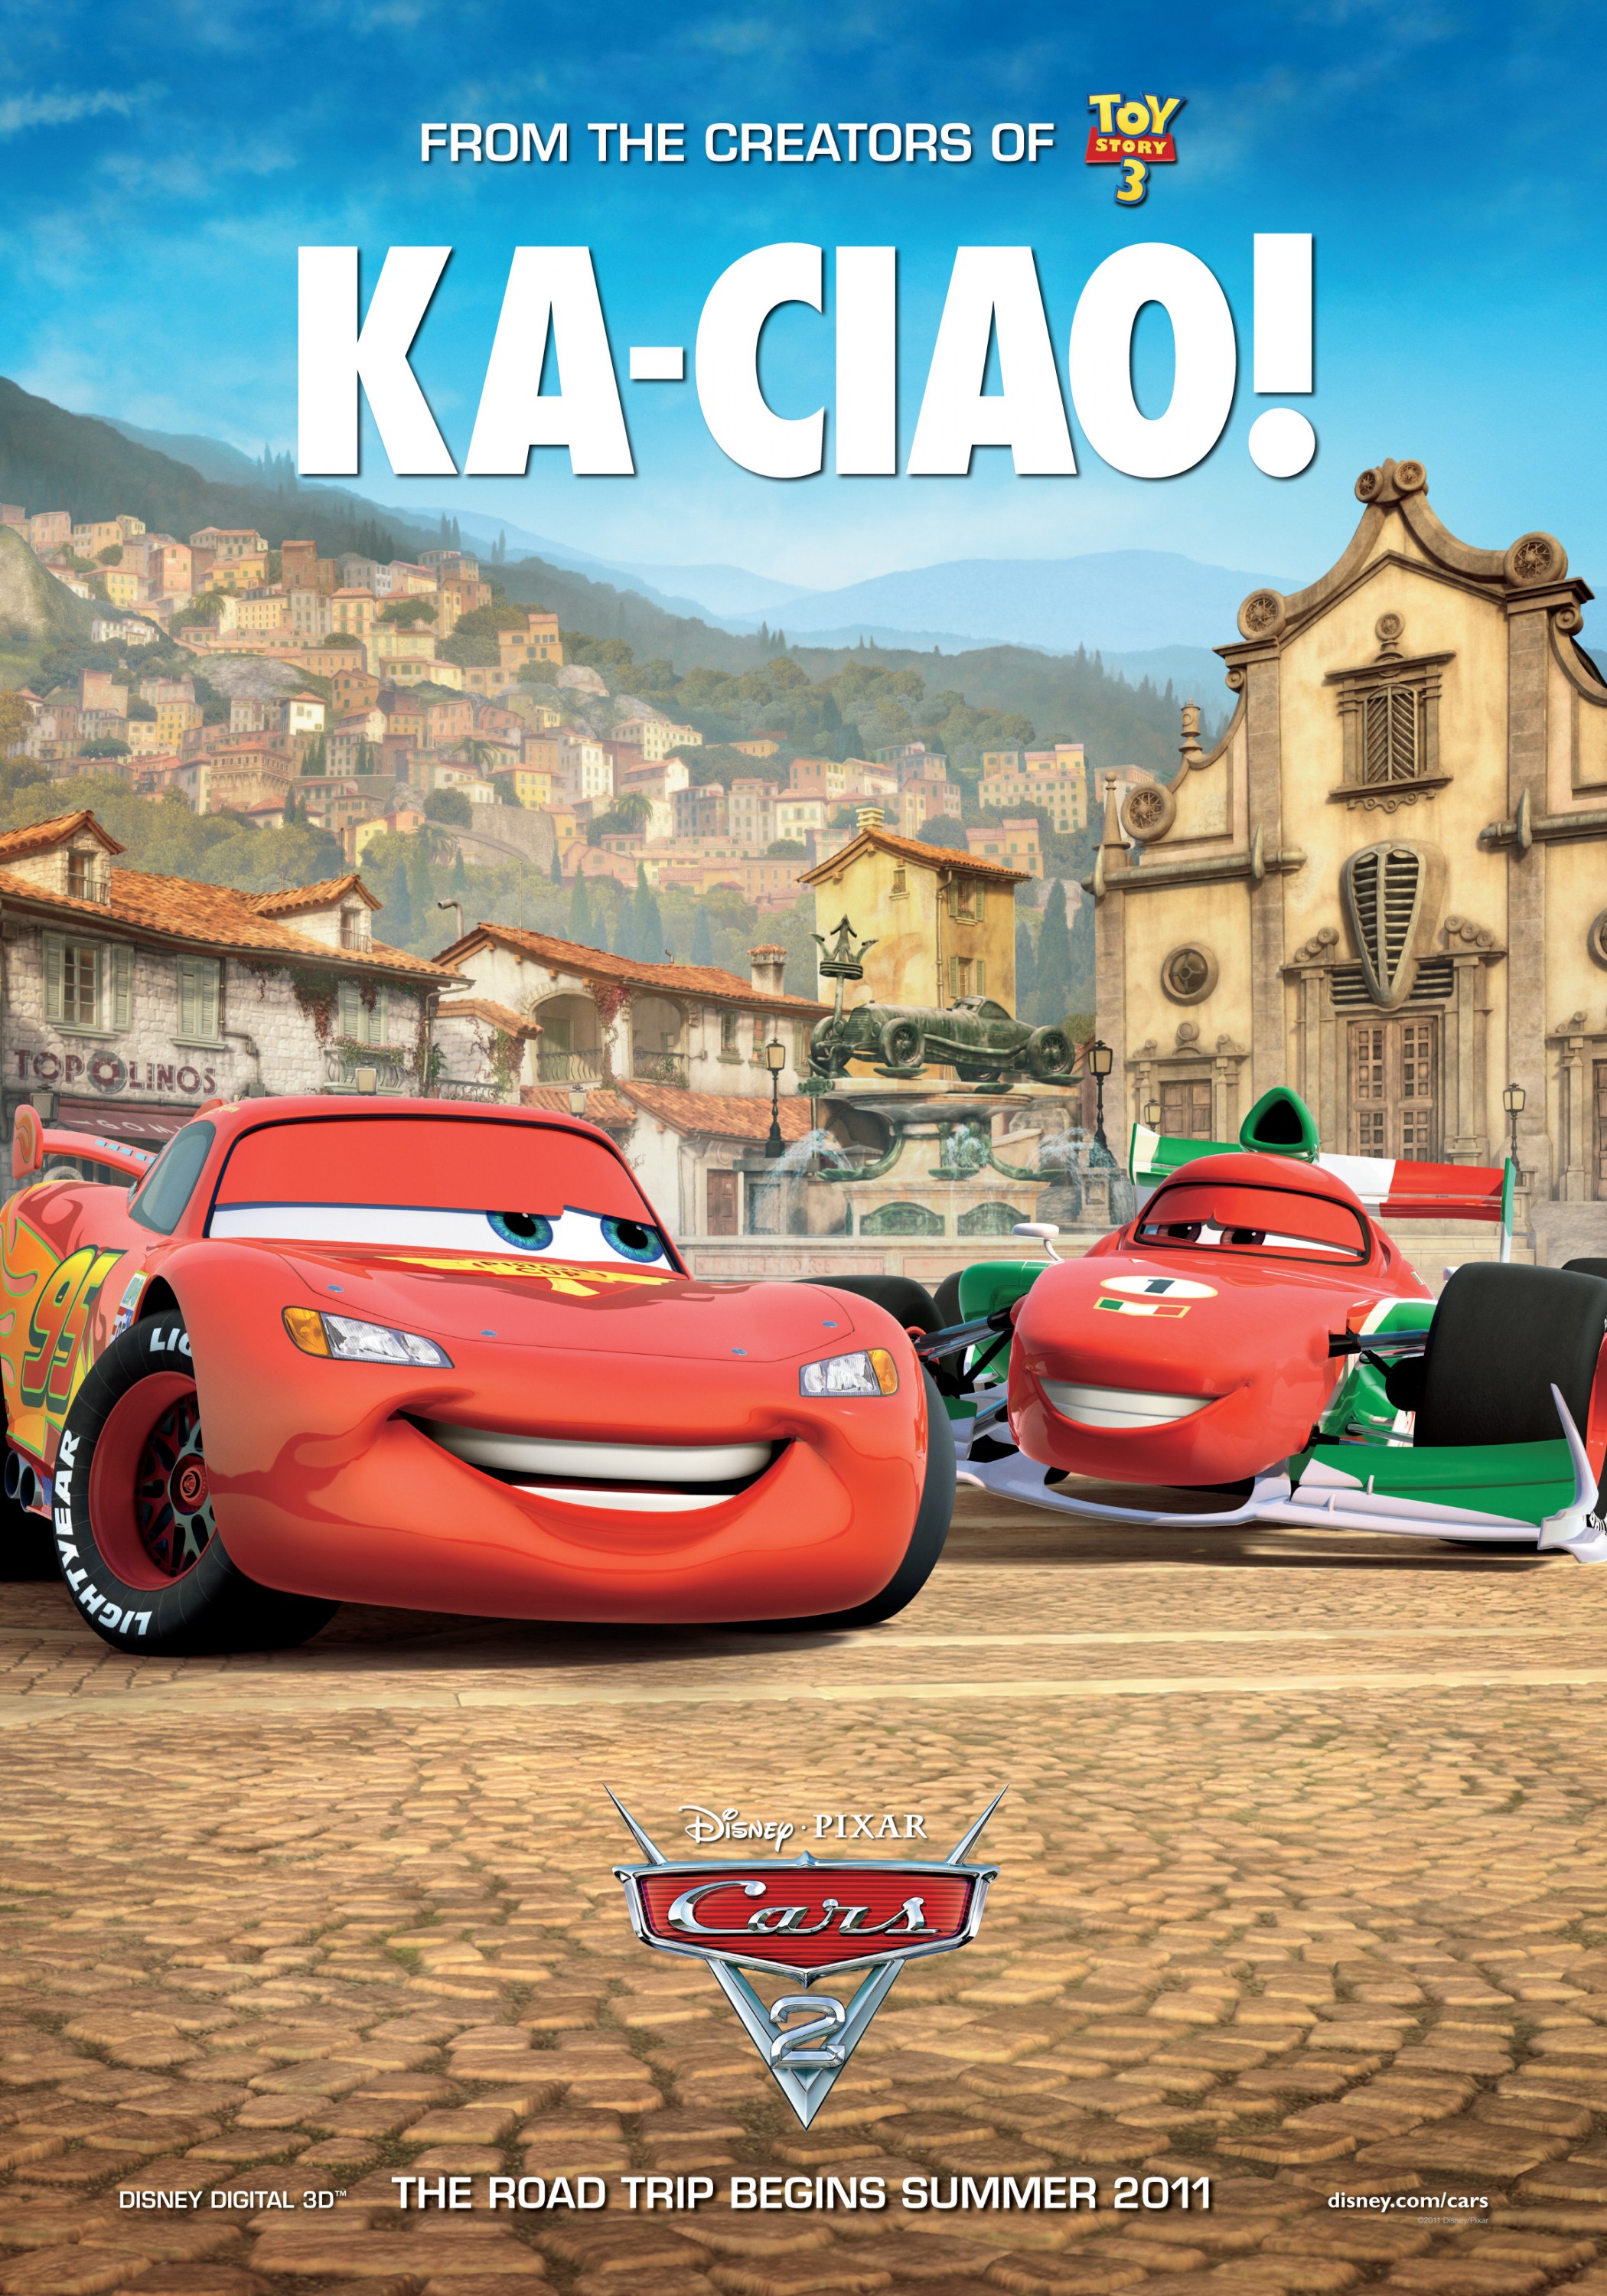 Mega Sized Movie Poster Image for Cars 2 (#11 of 18)